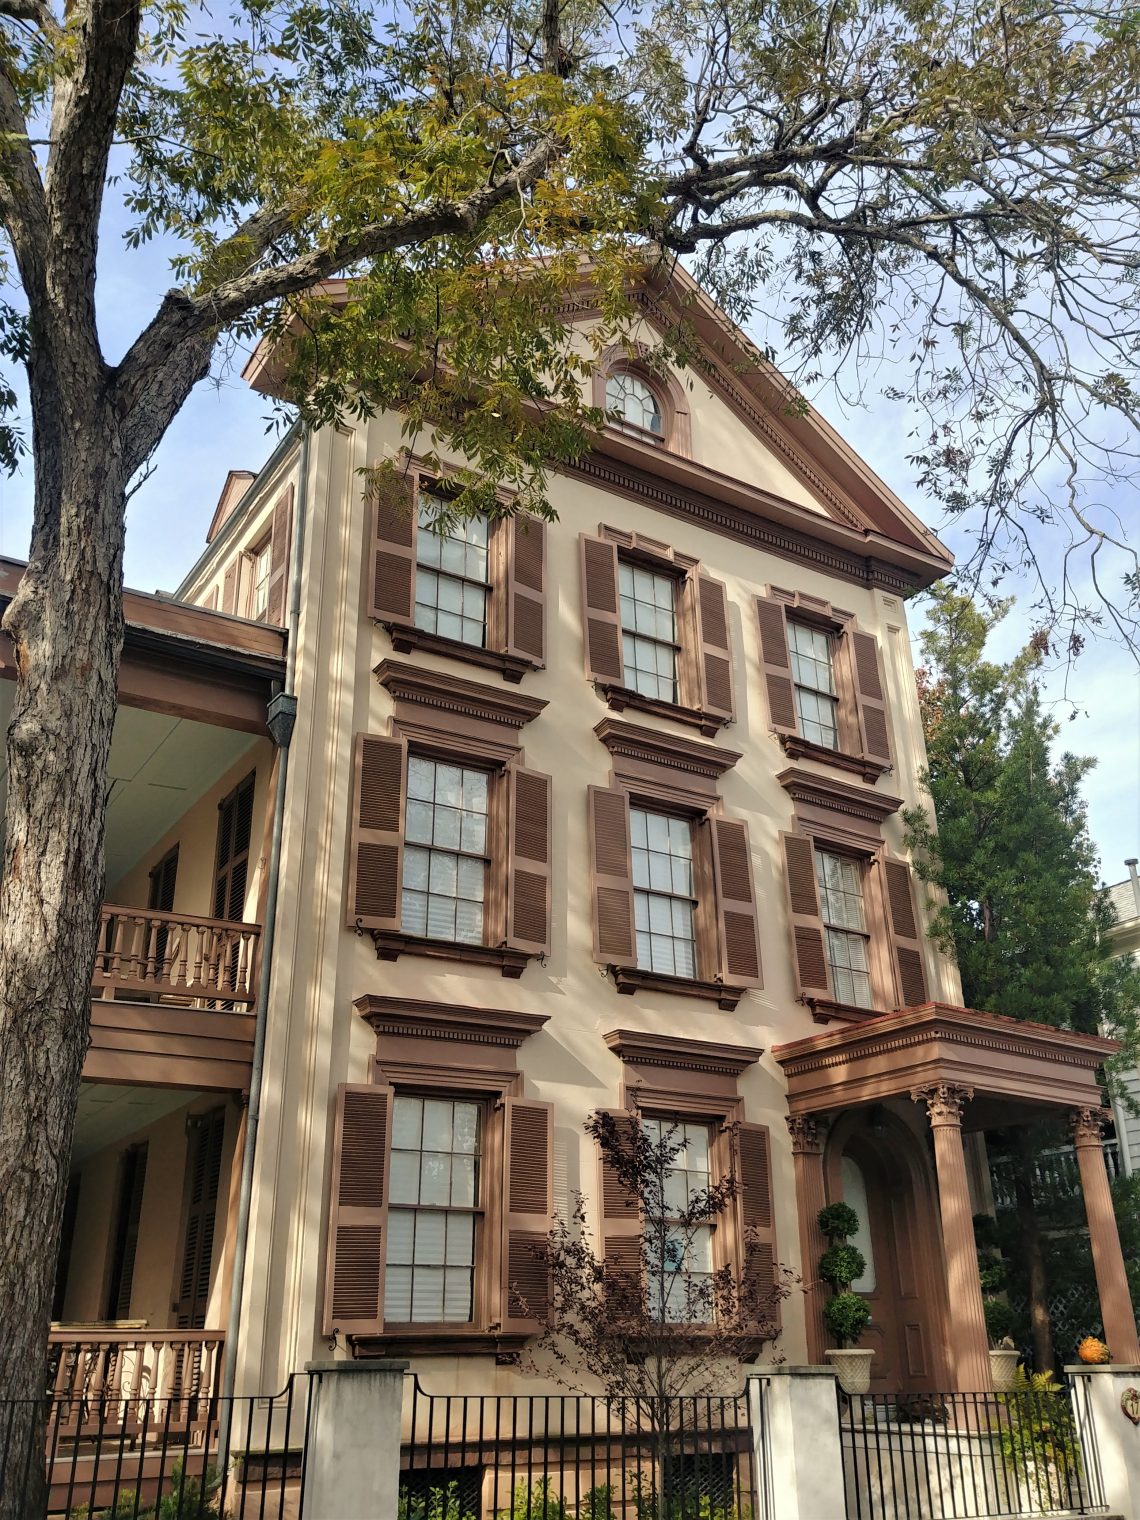 Built in 1850, this architecturally diverse house on Franklin Street was home to French consul in the 1870's and 1880's. 